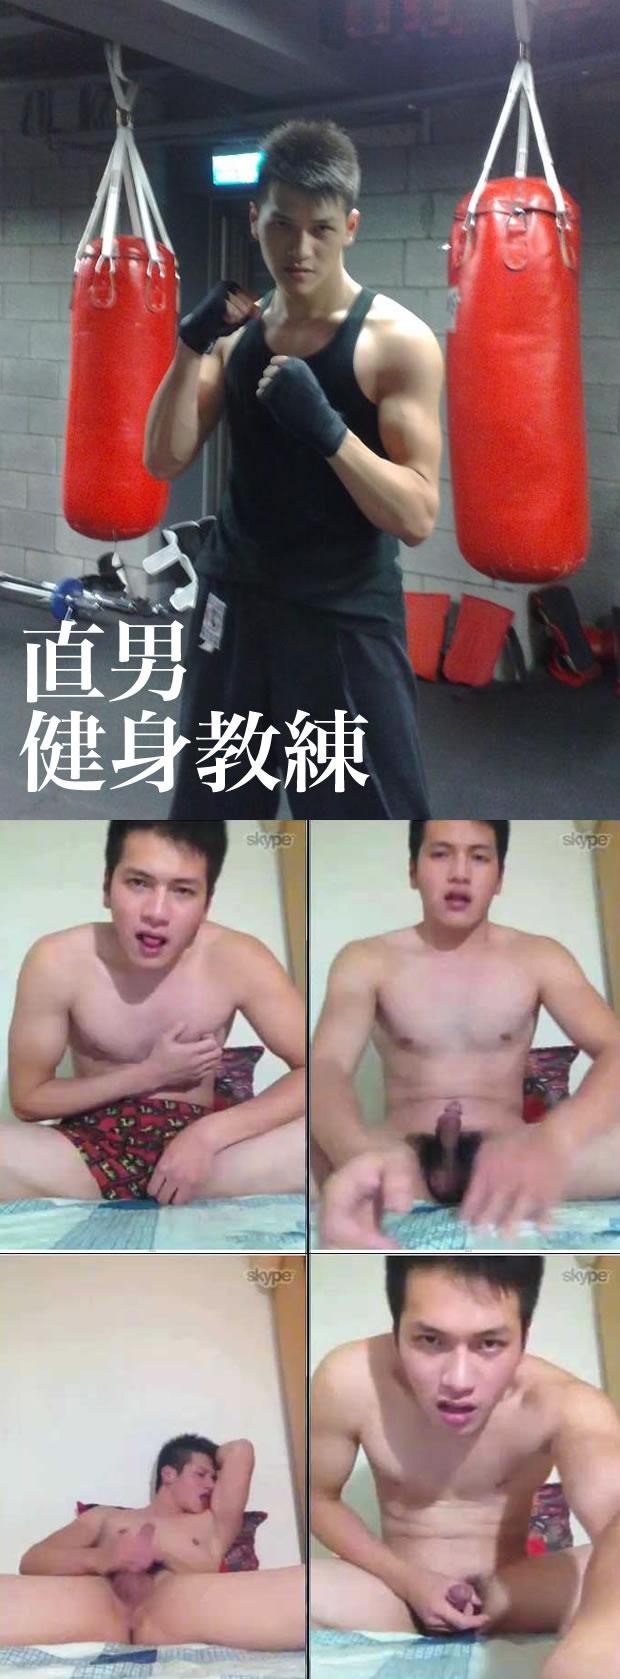 this-week-on-sticky-premium-20151107-chinese-gym-instructor